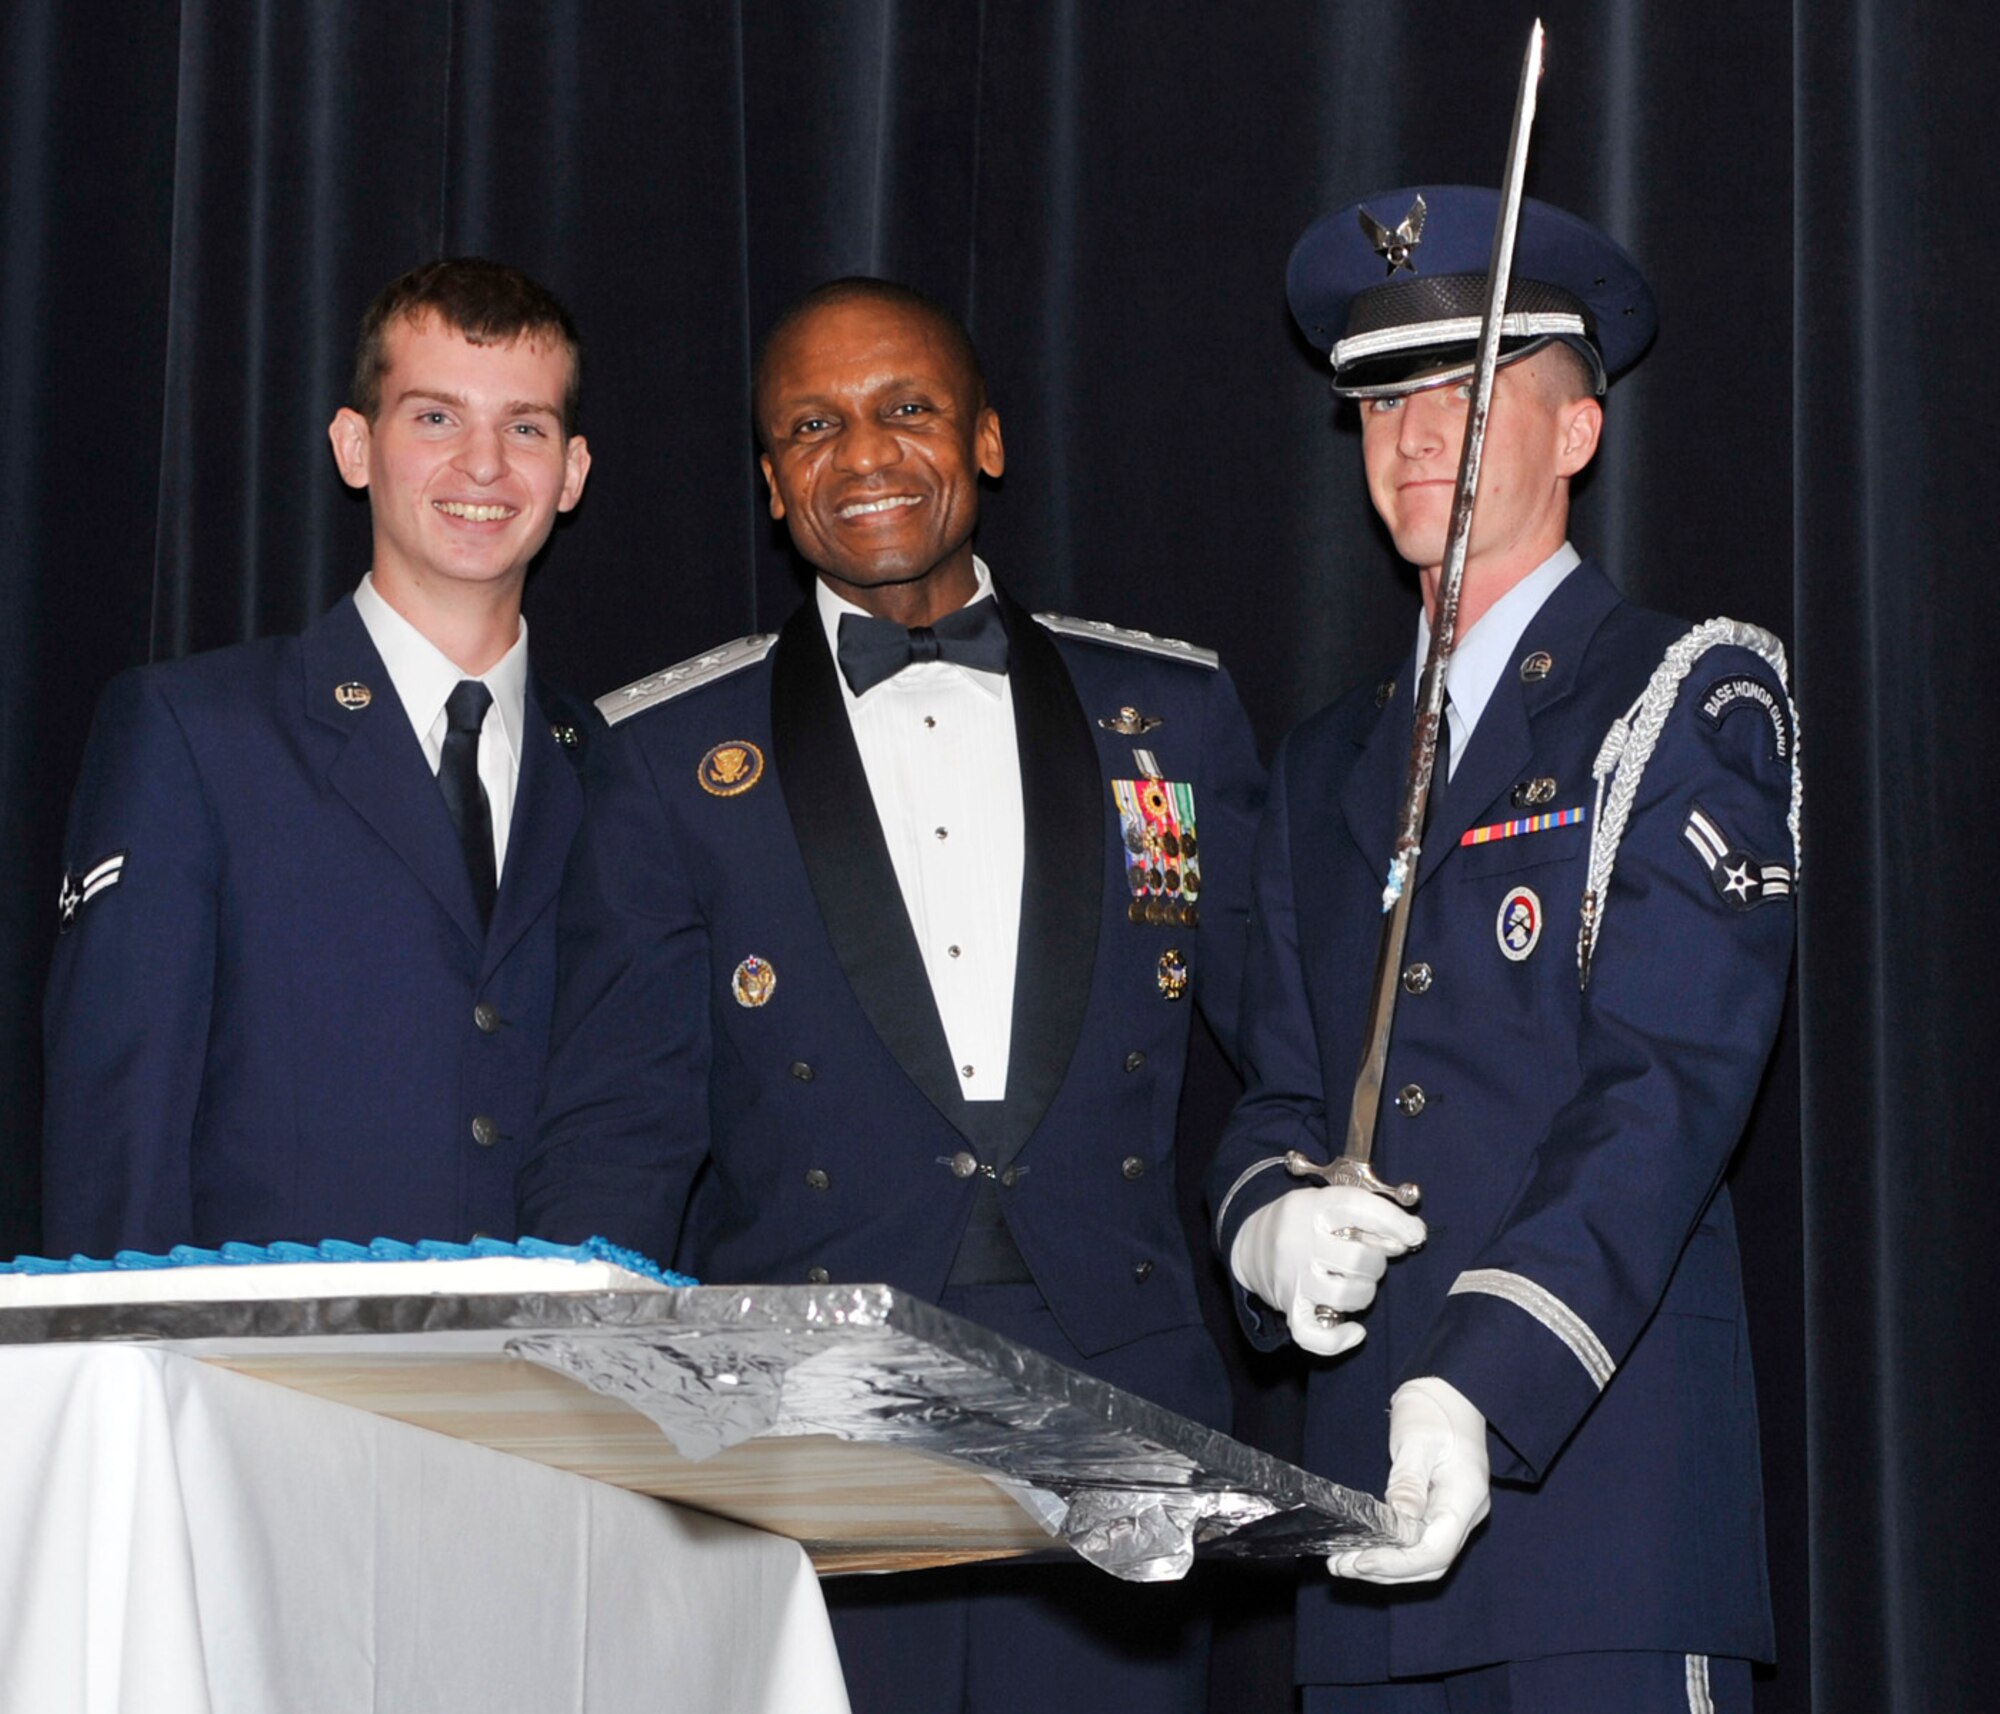 Lt. Gen. Darren McDew, commander of 18th Air Force, poses with Airman 1st Class Christopher Sims, left, the youngest Airman in attendance, and Airman 1st Class David Brannum, Team Dover honor guard member, after cutting the birthday cake at the Air Force Ball Sep. 7, 2012, at Dover Downs in Dover, Del. The cutting of the cake was part of the celebration commemorating the Air Force’s 65th birthday. (U.S. Air Force photo by Tech. Sgt. Chuck Walker)